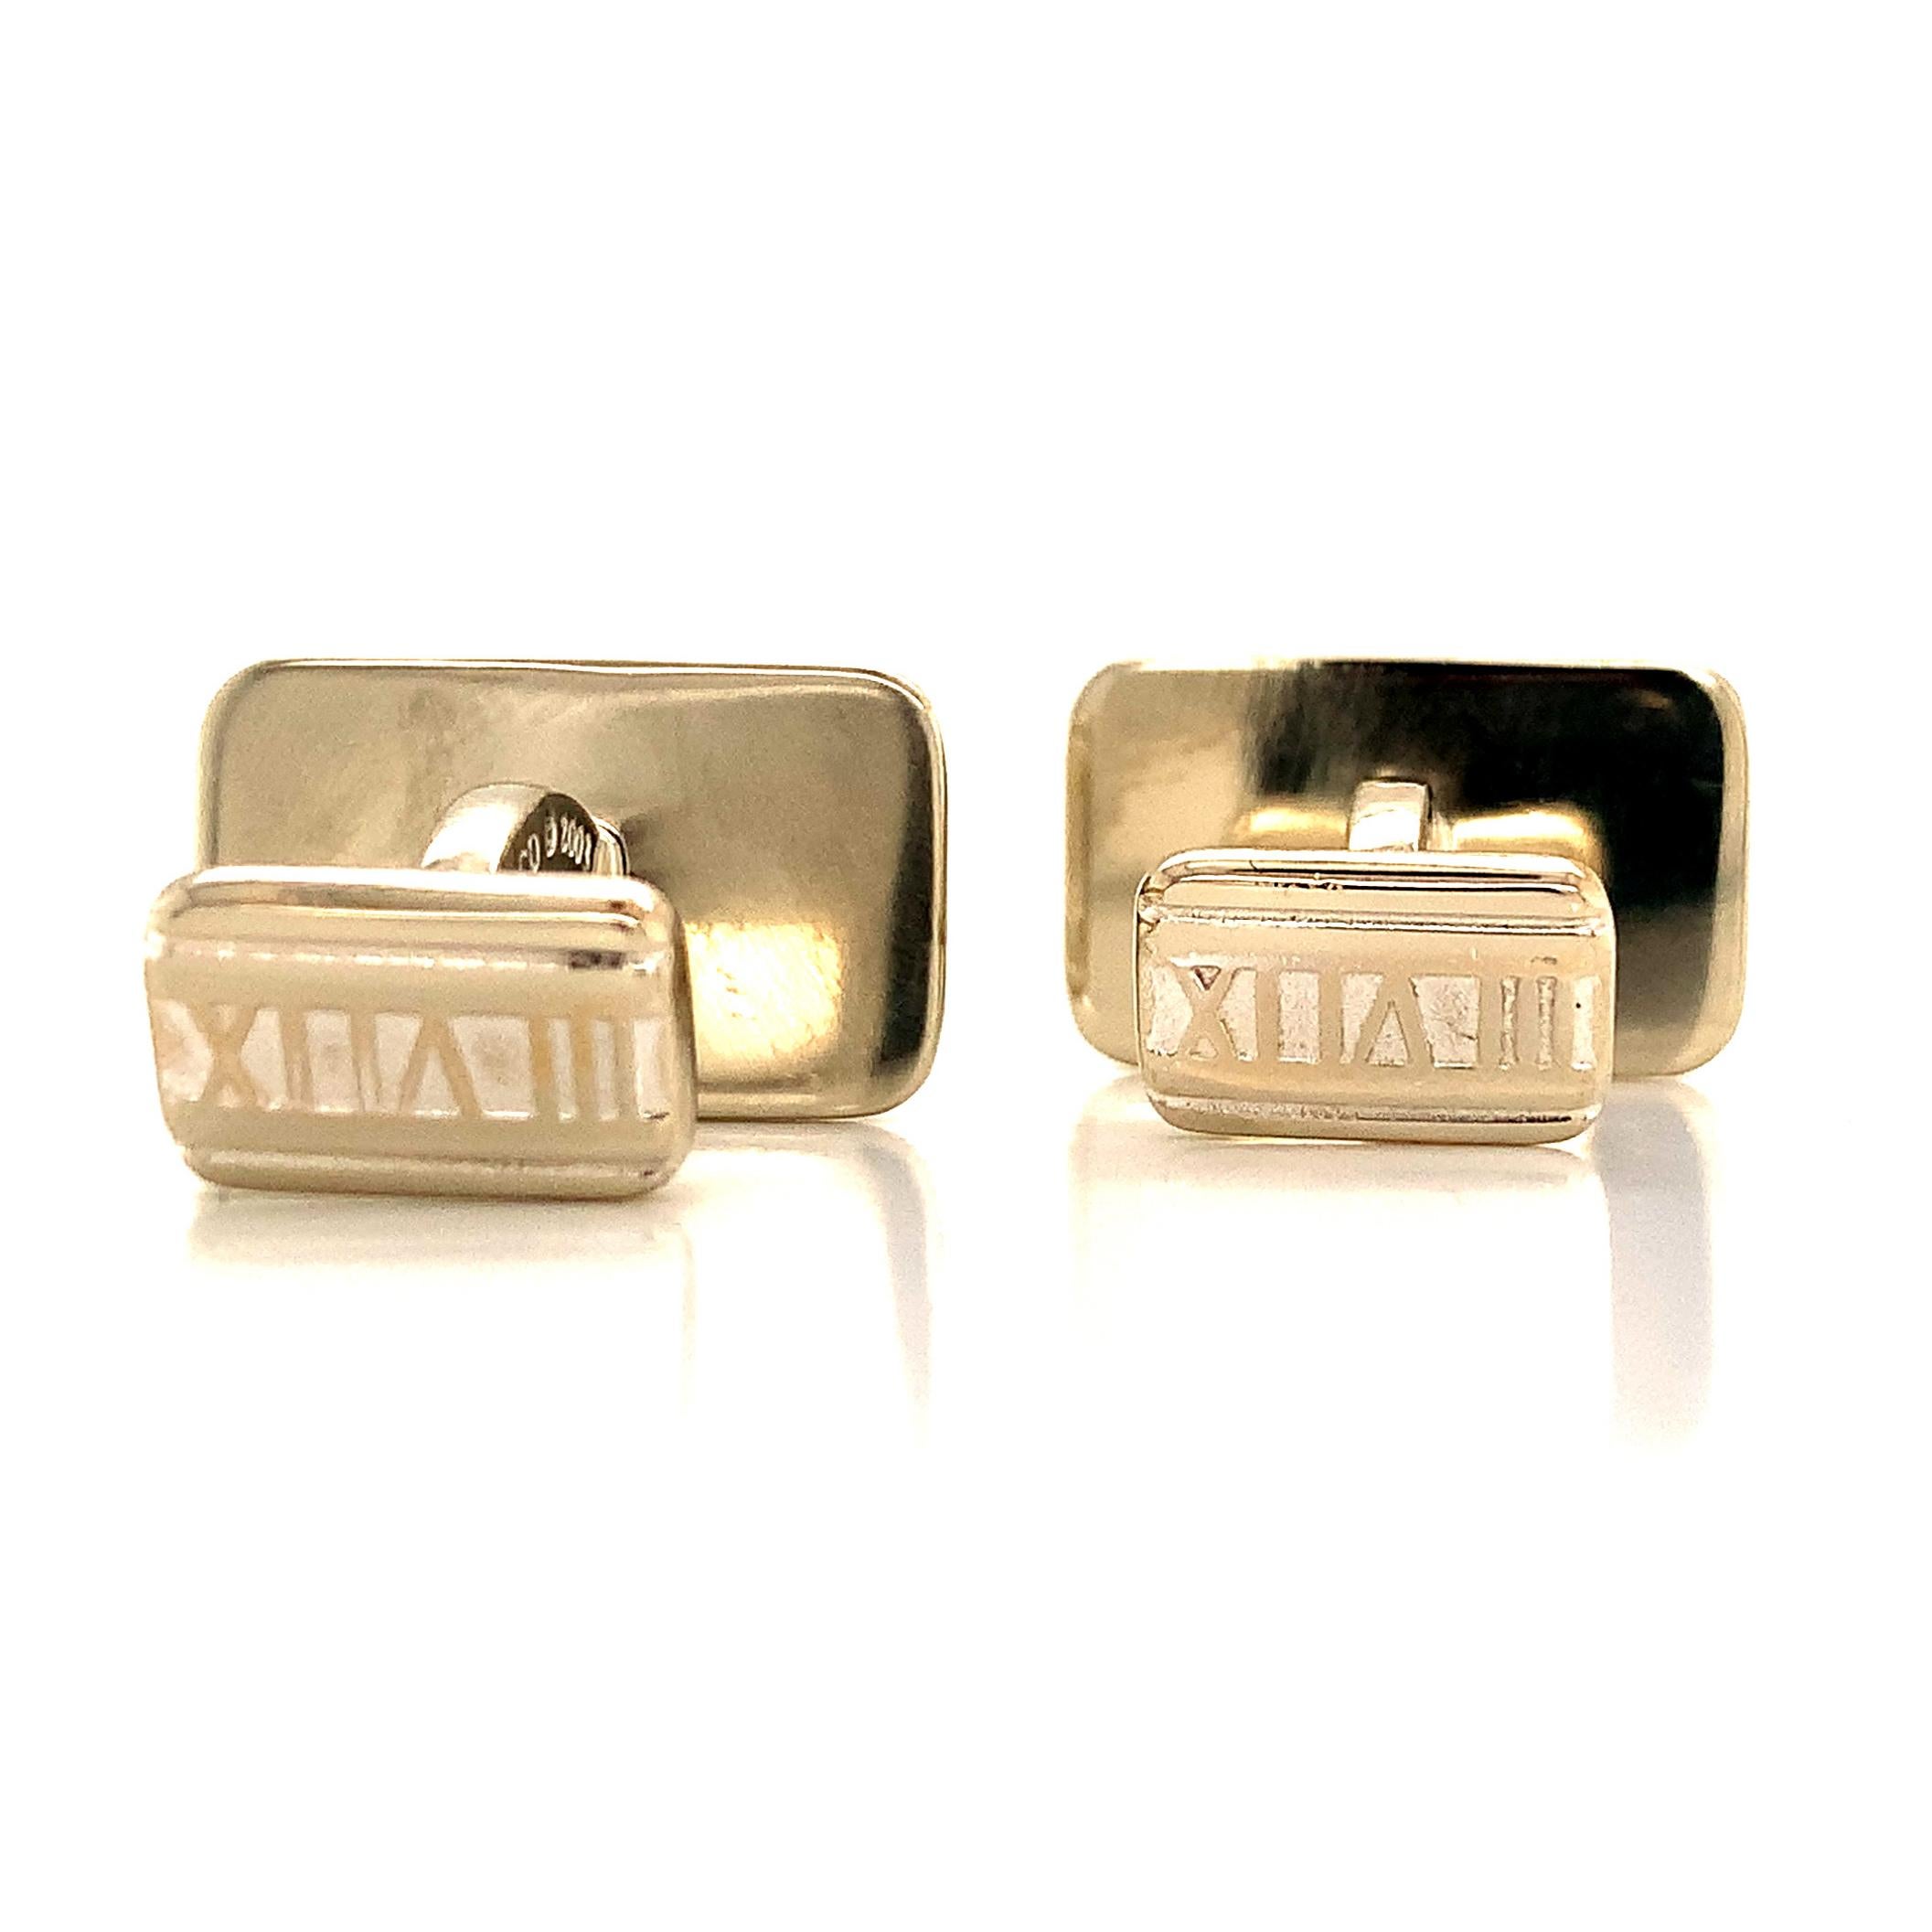 Tiffany & Co. Estate Cufflinks Roman Numeral Sterling Silver 10.5 Grams TIF43
 
This elegant Authentic Tiffany & Co Men's Cufflinks has a weight of 10.5 Grams.
 
The Tiffany & Co items have the natural patina As they are estate silver pieces.
 
We